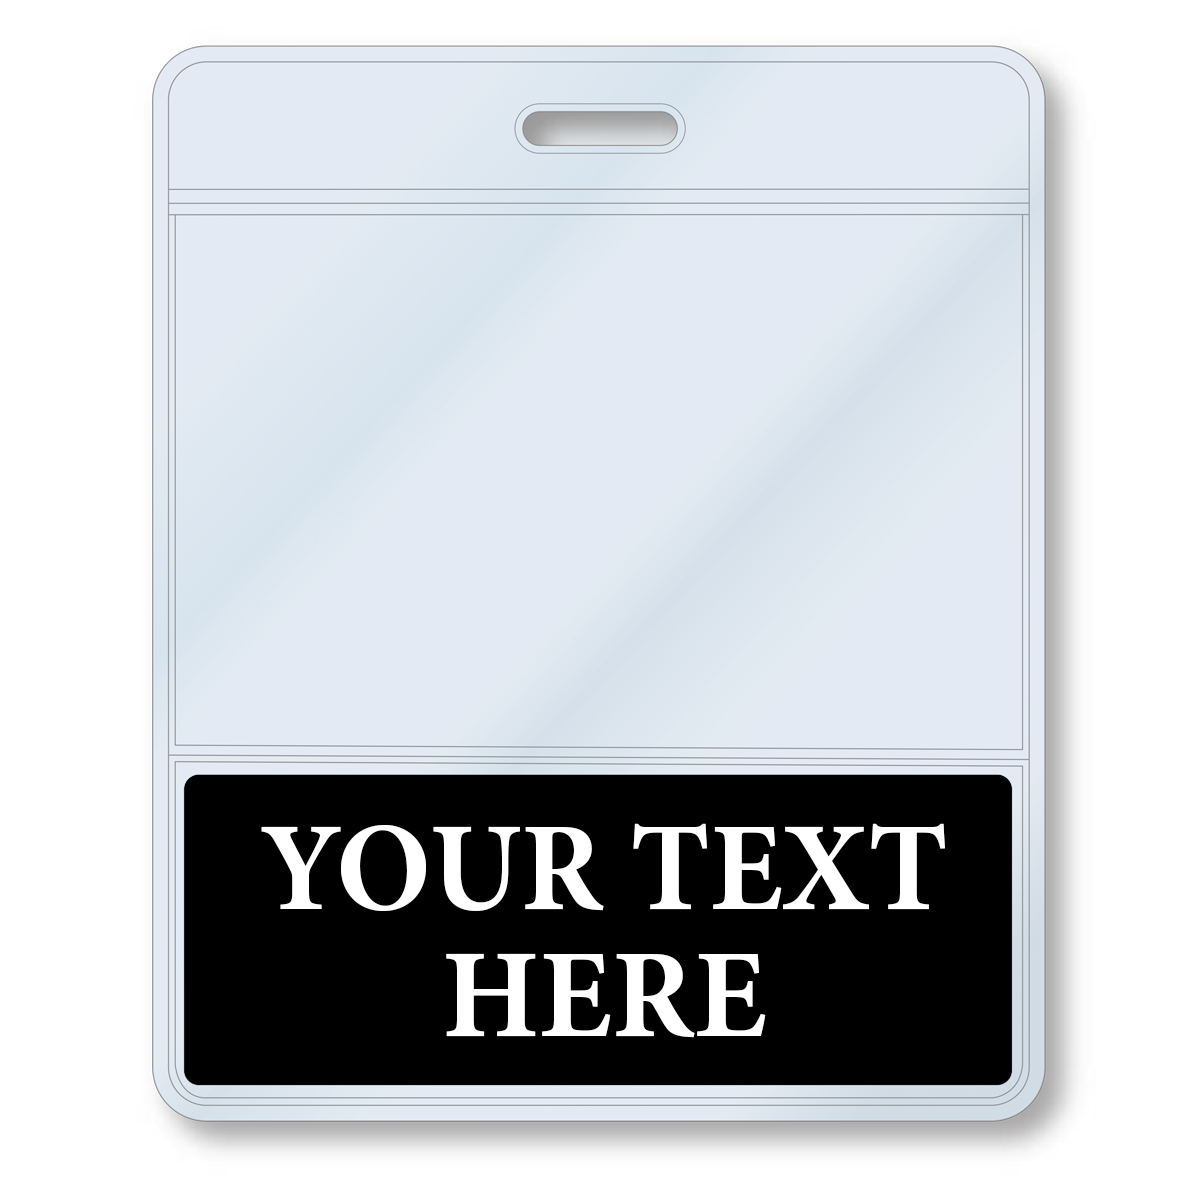 A Custom Printed BadgeBottoms® Horizontal (Badge Holder & Badge Buddy IN ONE) with a customizable title and a text field at the bottom displaying "YOUR TEXT HERE" in white uppercase letters on a black background.